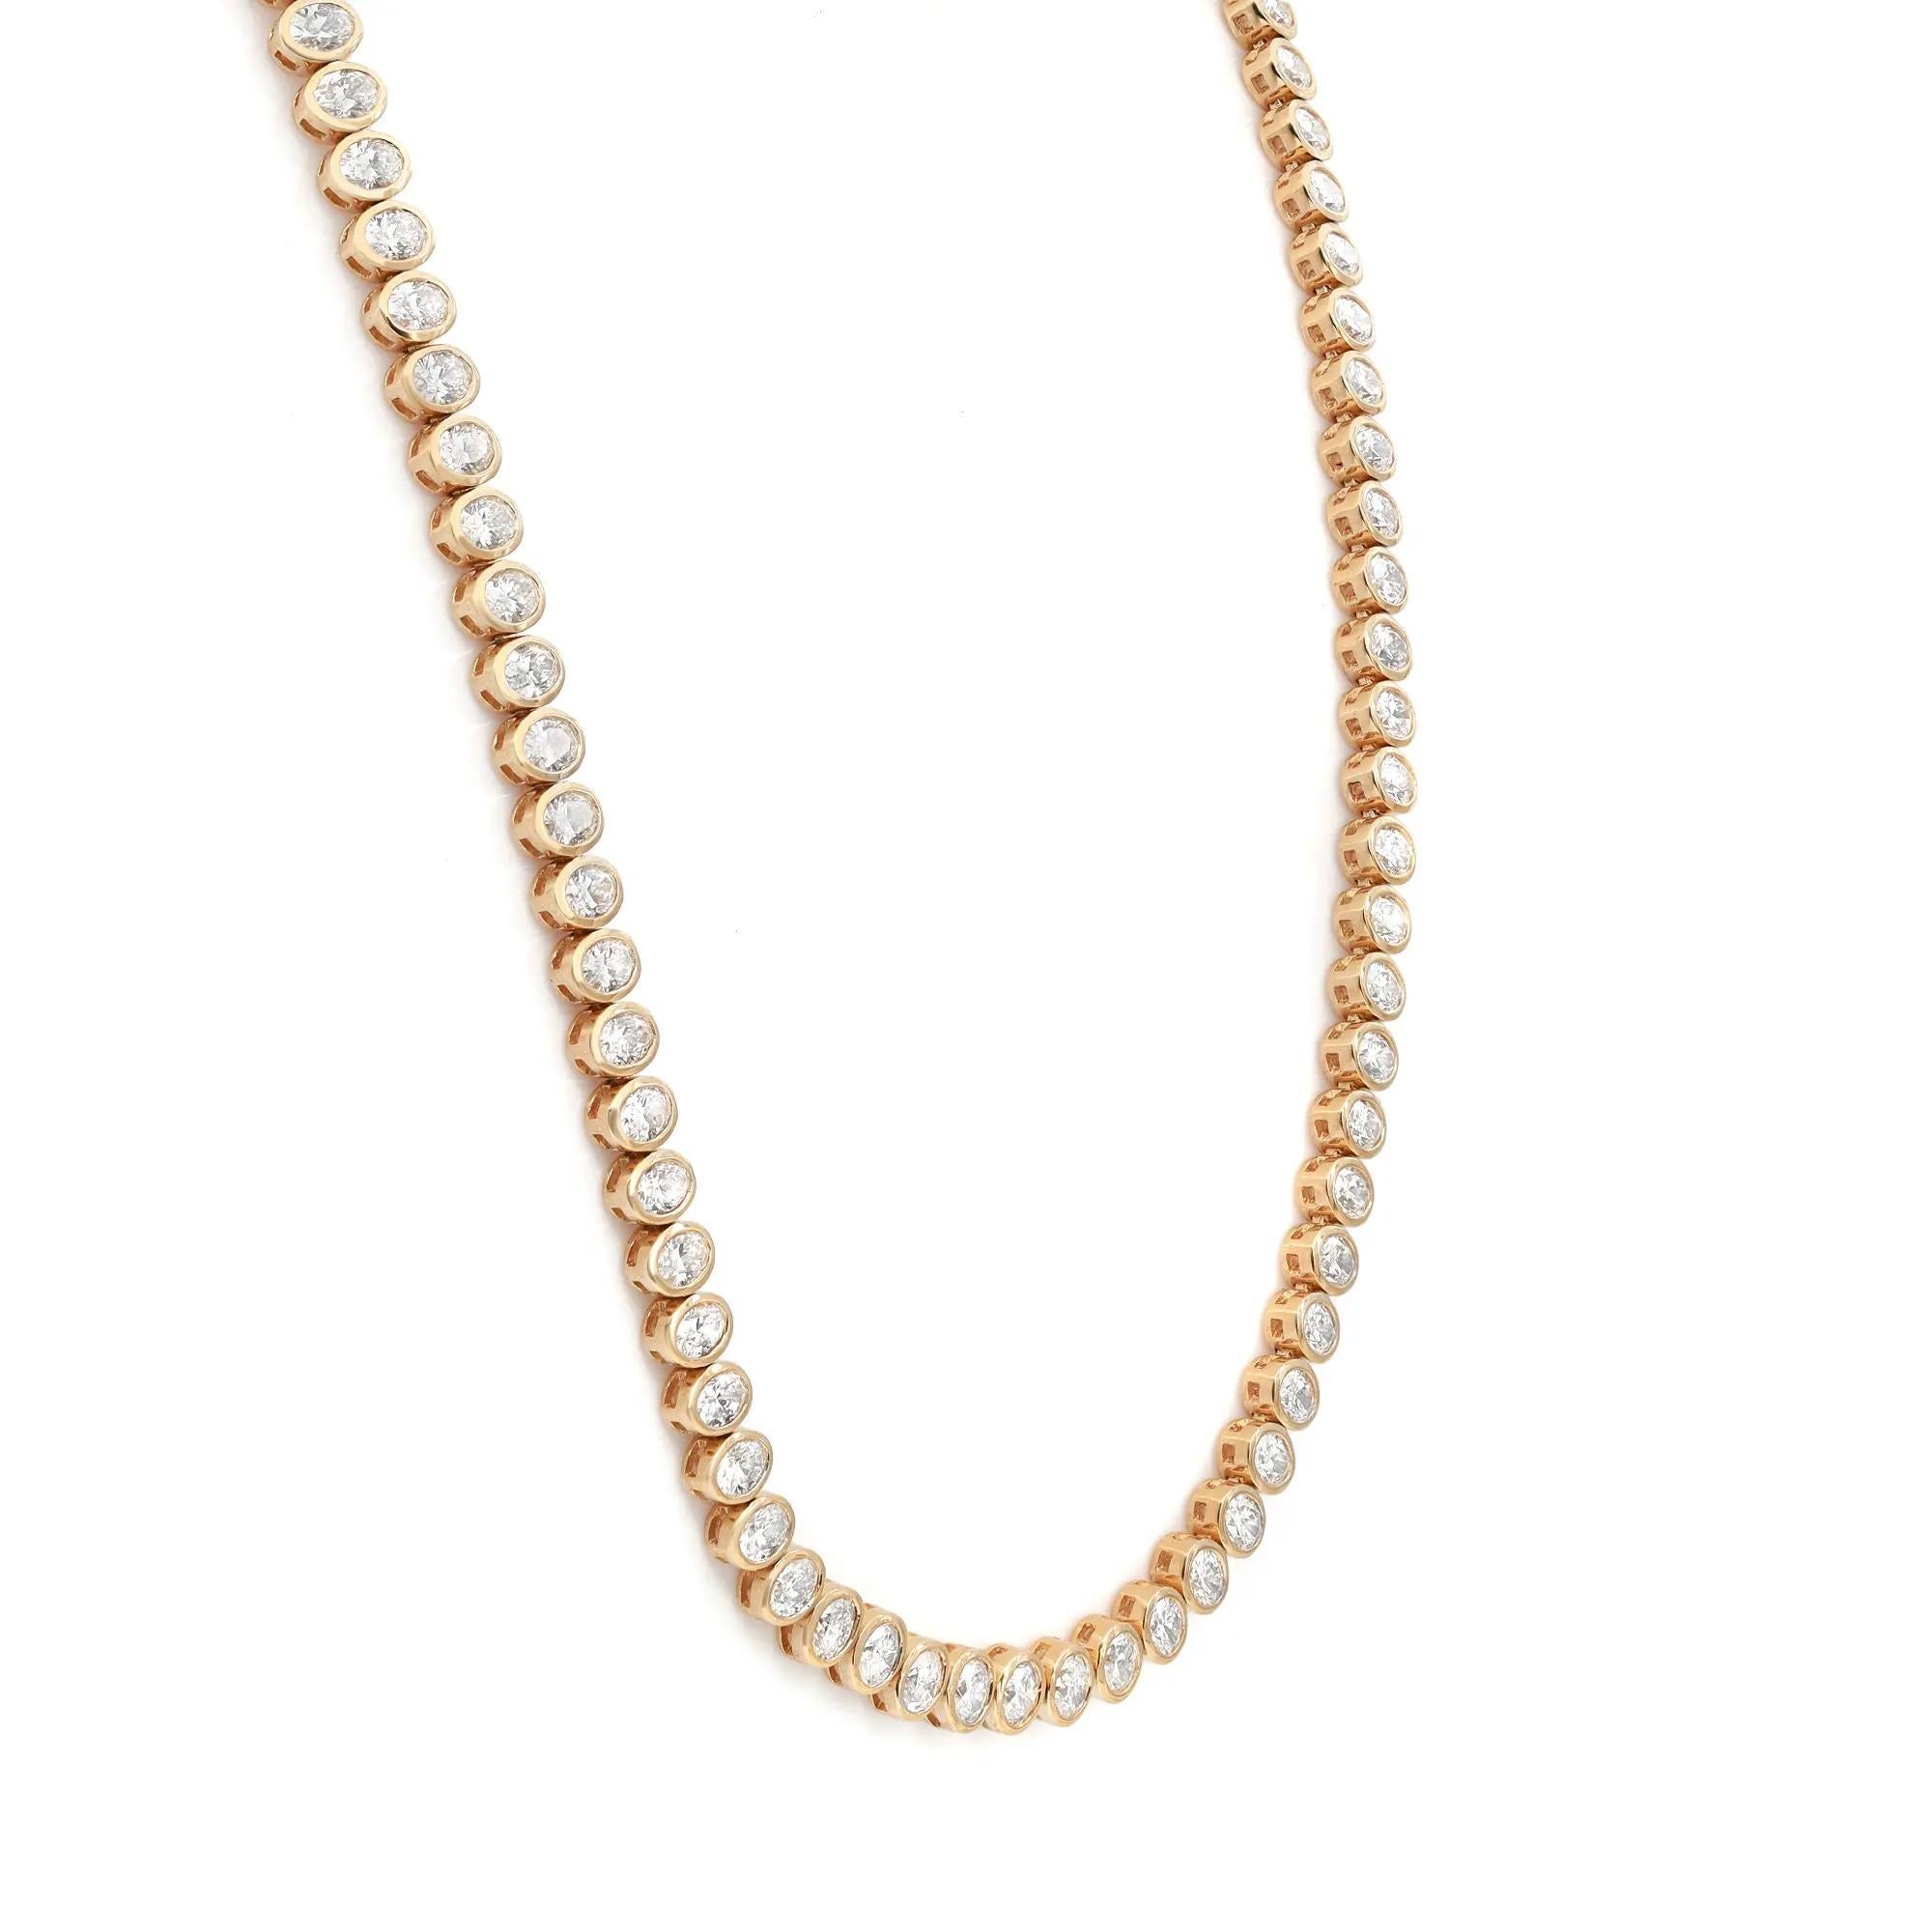 A classic diamond single-line tennis necklace is an iconic essential that always remains in fashion. This elegant and alluring necklace features 108 bezel set bright white oval cut diamonds weighing 14.76 carats in total. Crafted in 18K yellow gold.